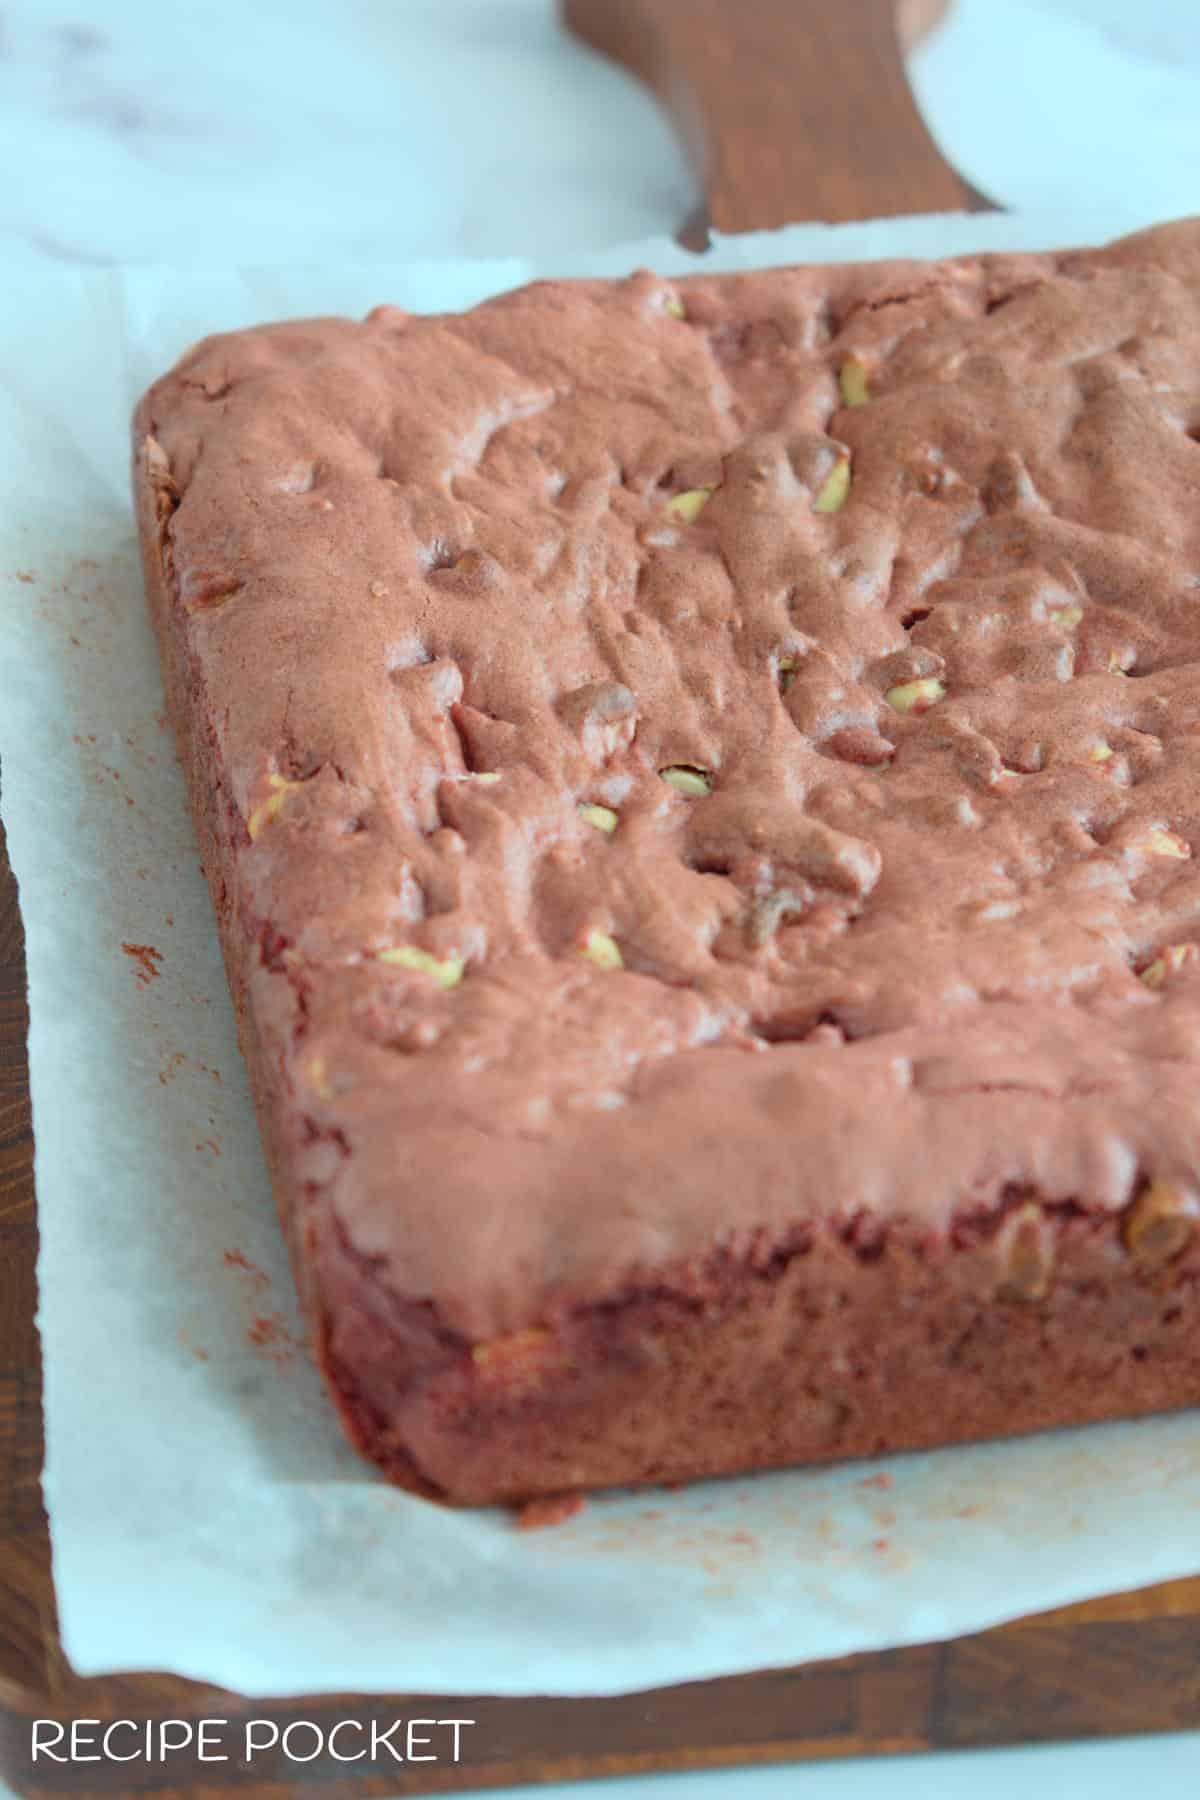 A baked brownie cake on a wooden board before frosting and cutting.